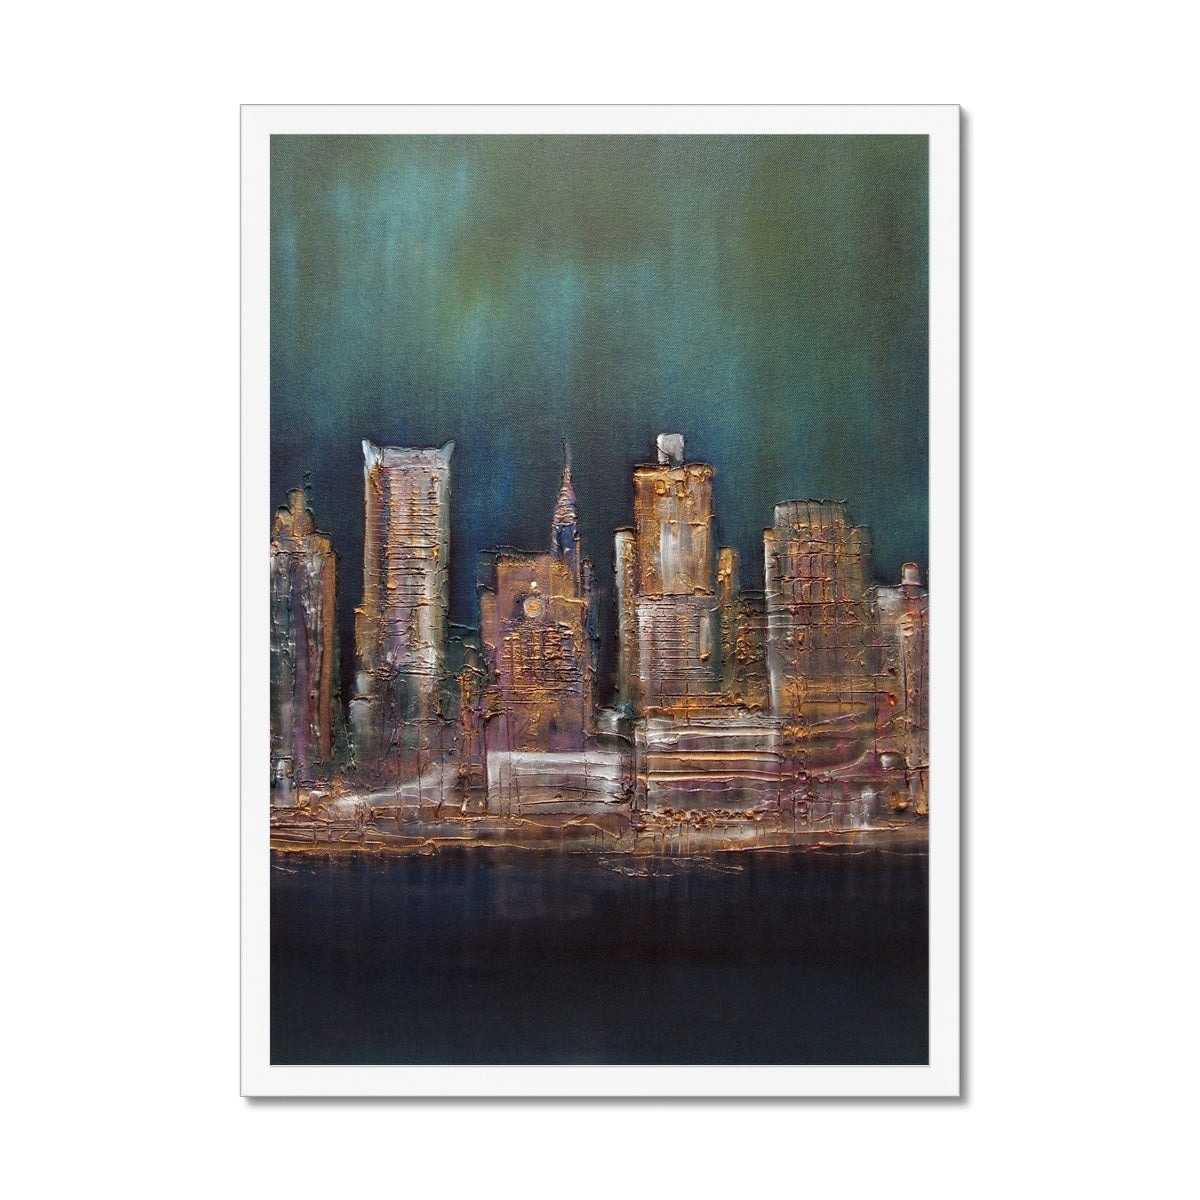 New York West Side Painting | Framed Prints From Scotland-Framed Prints-World Art Gallery-A2 Portrait-White Frame-Paintings, Prints, Homeware, Art Gifts From Scotland By Scottish Artist Kevin Hunter